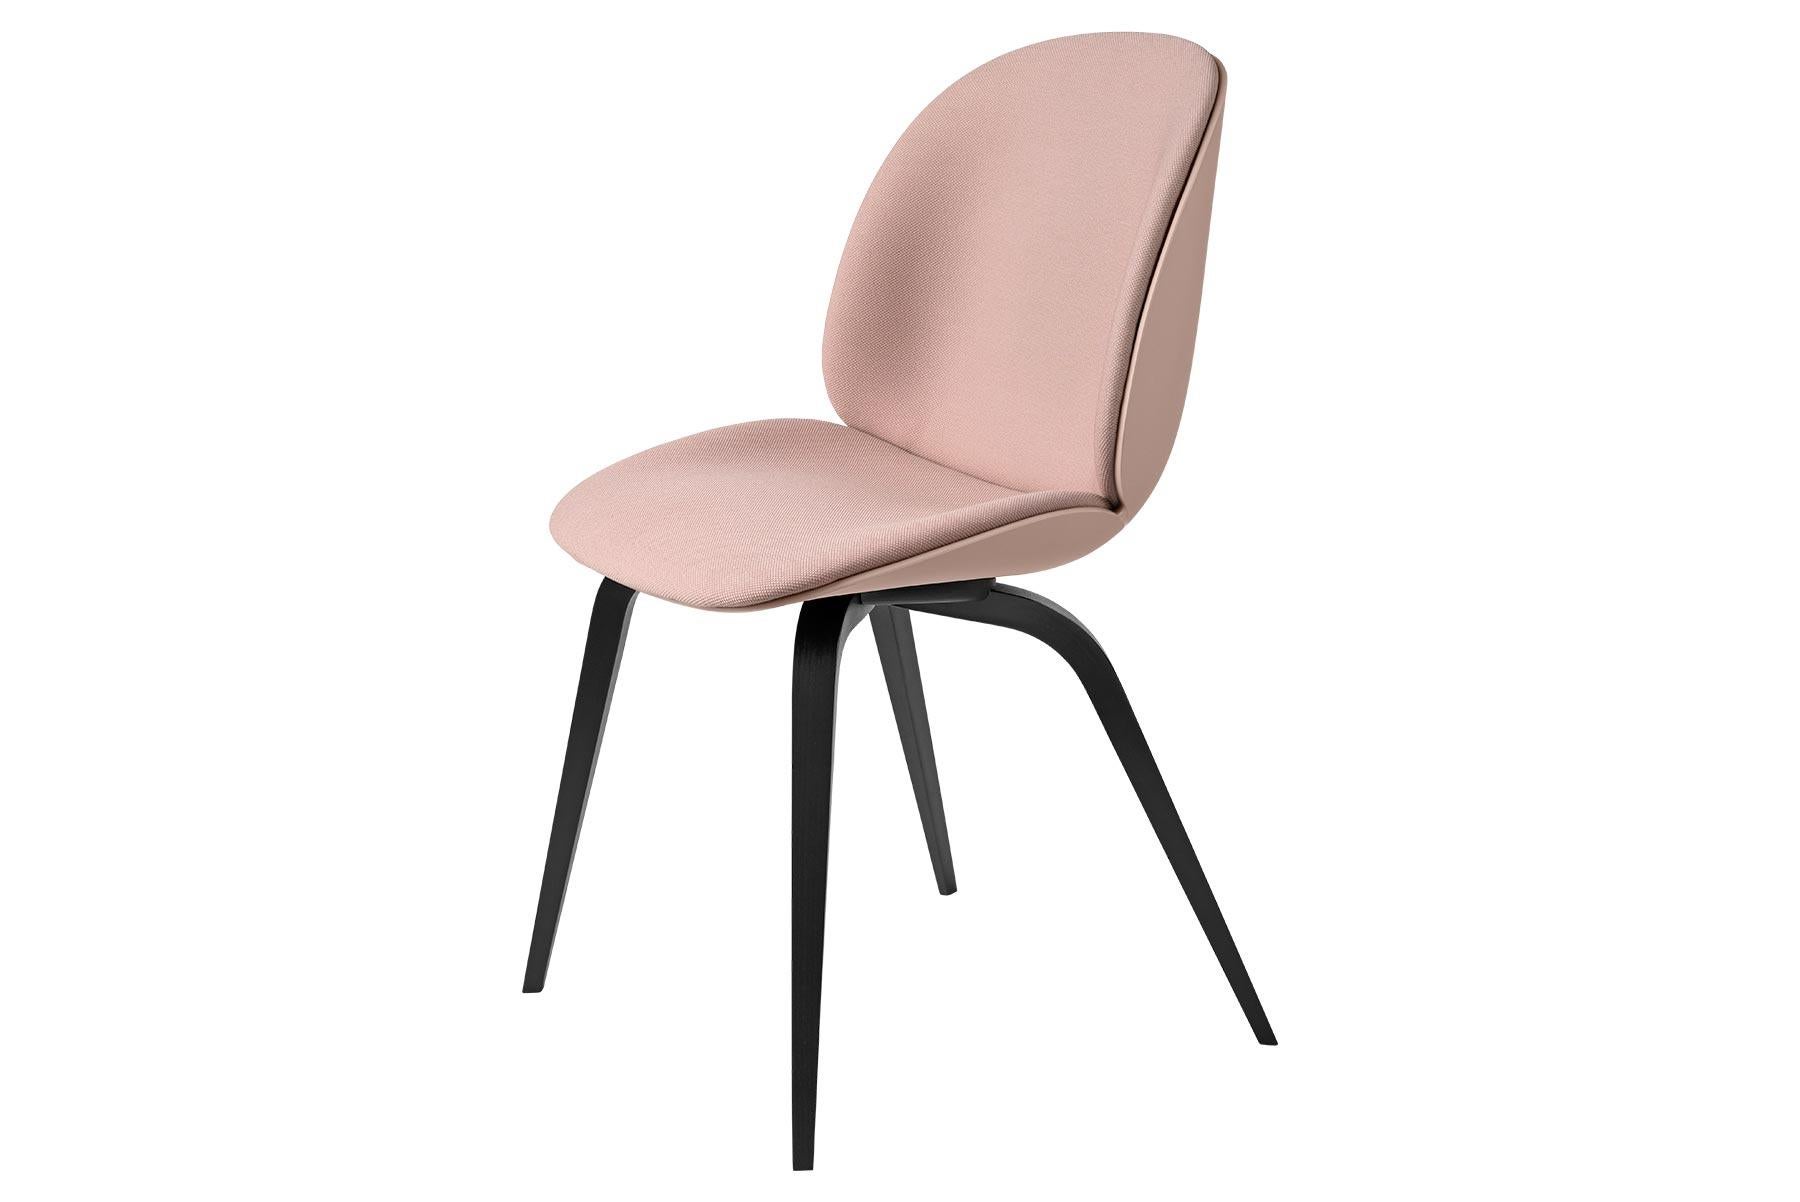 Looking closely at the anatomy of the beetle insect, characterized by its solid outside and soft inside, the front upholstered Beetle chair possesses all attributes. The front upholstered Beetle Chair holds the same soft core as the fully